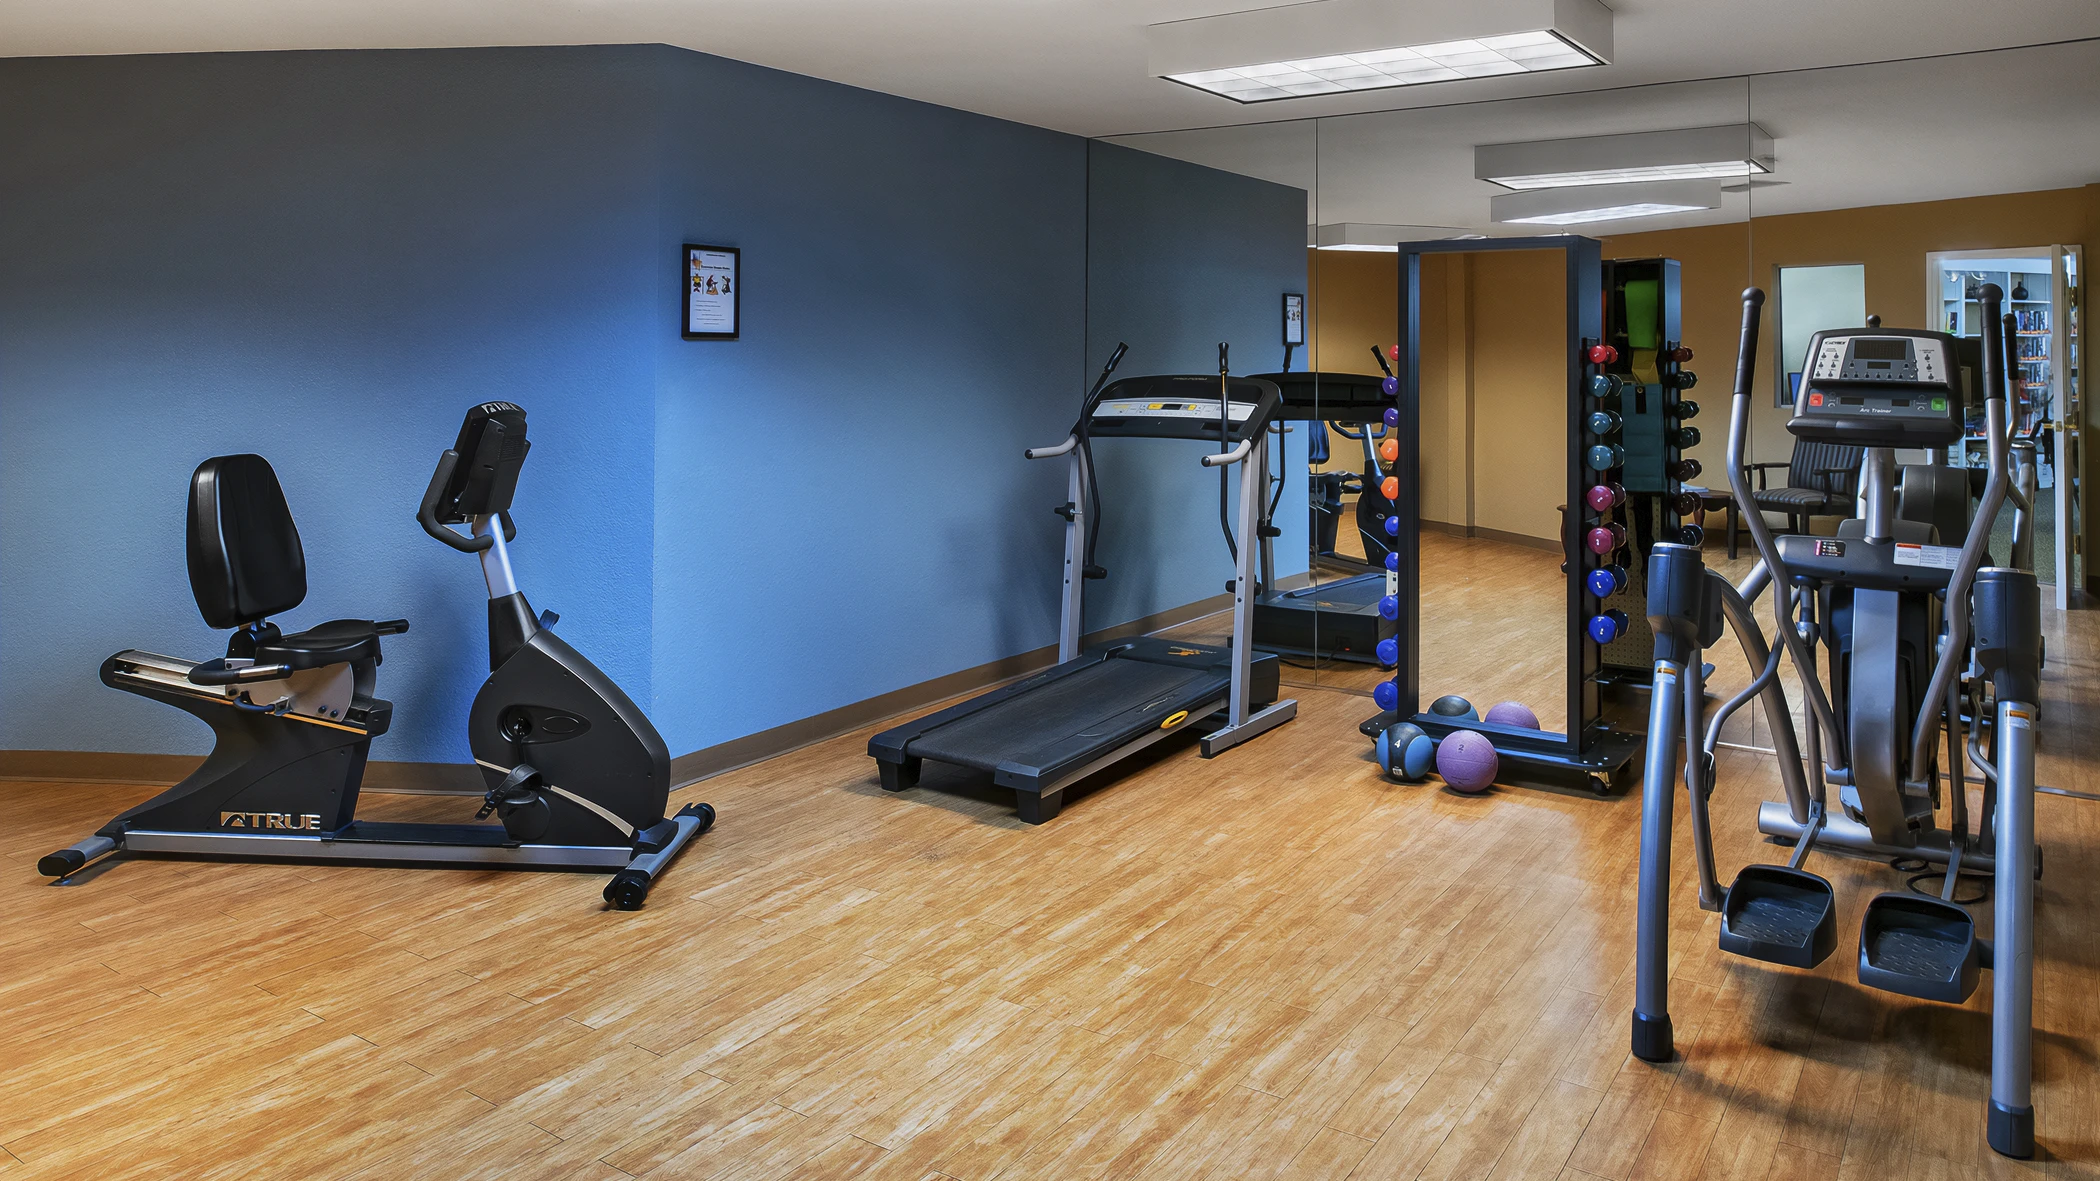 Exercise room at American House Milford, a senior citizen's community in Milford, MI